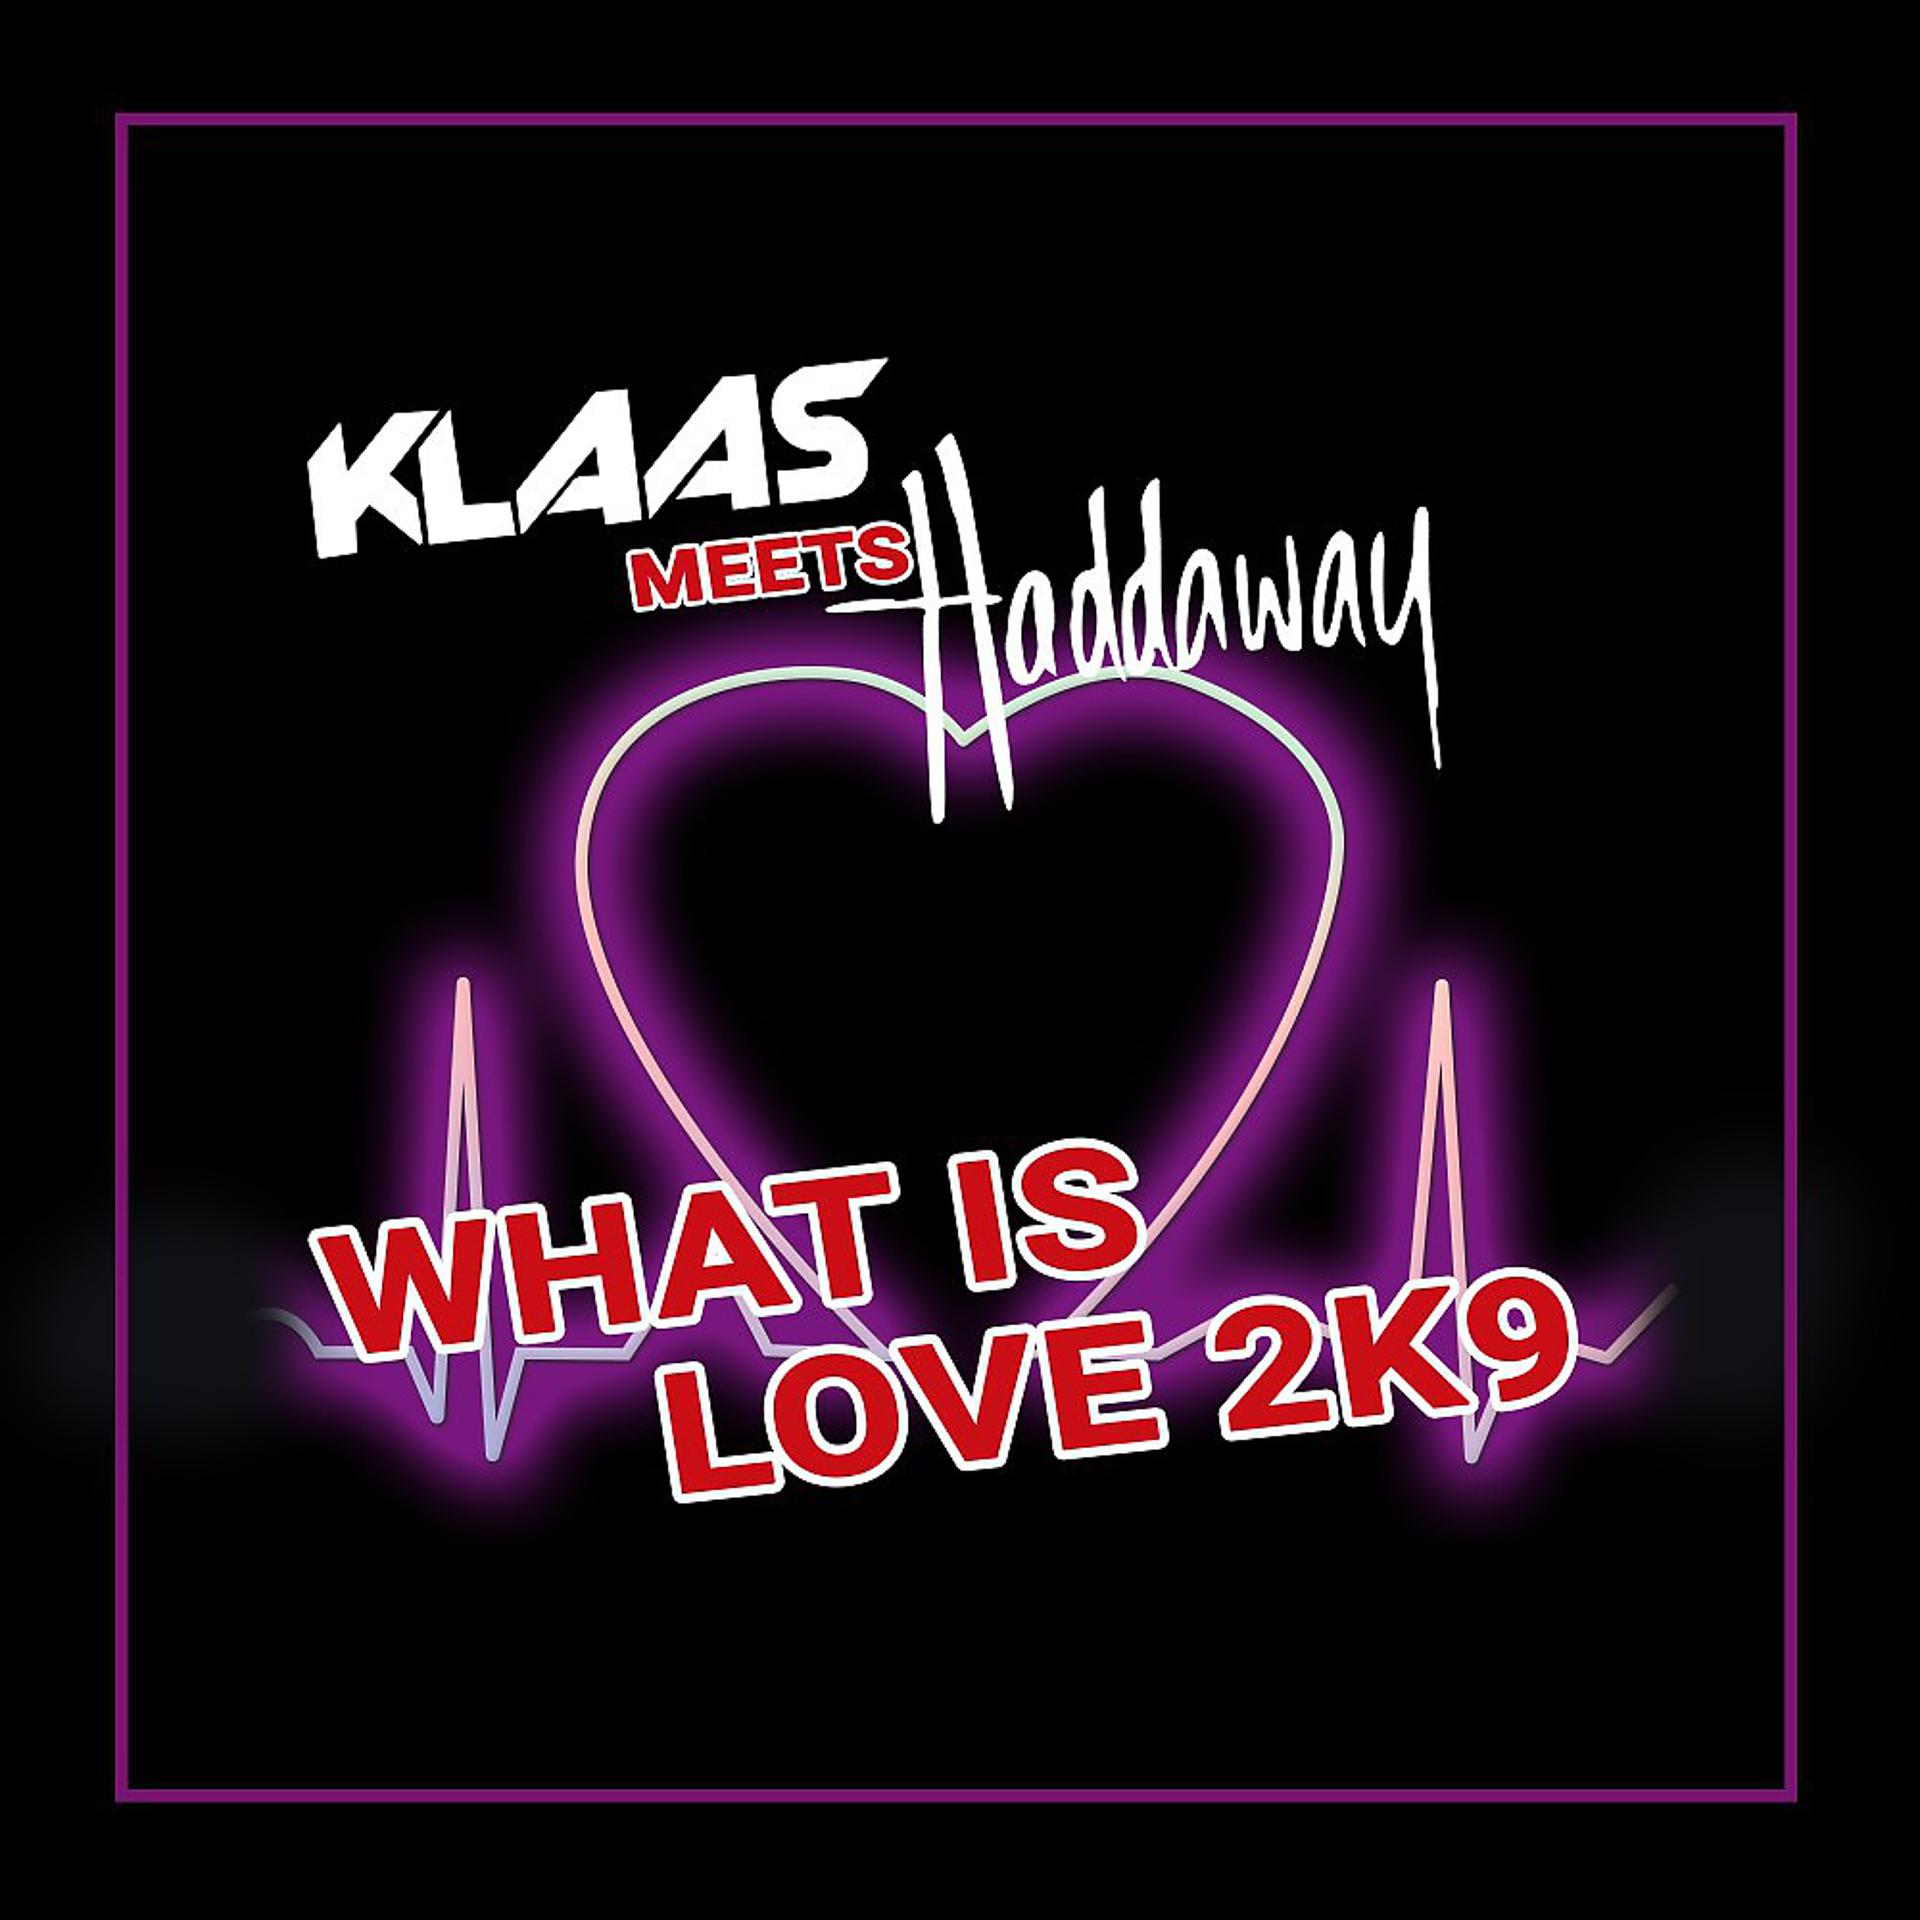 Haddaway-what-is-Love-2k9-Bodybangers-Remix.mp3. What is Love Remix. Don't leave me this way Klaas. Klaas the way.